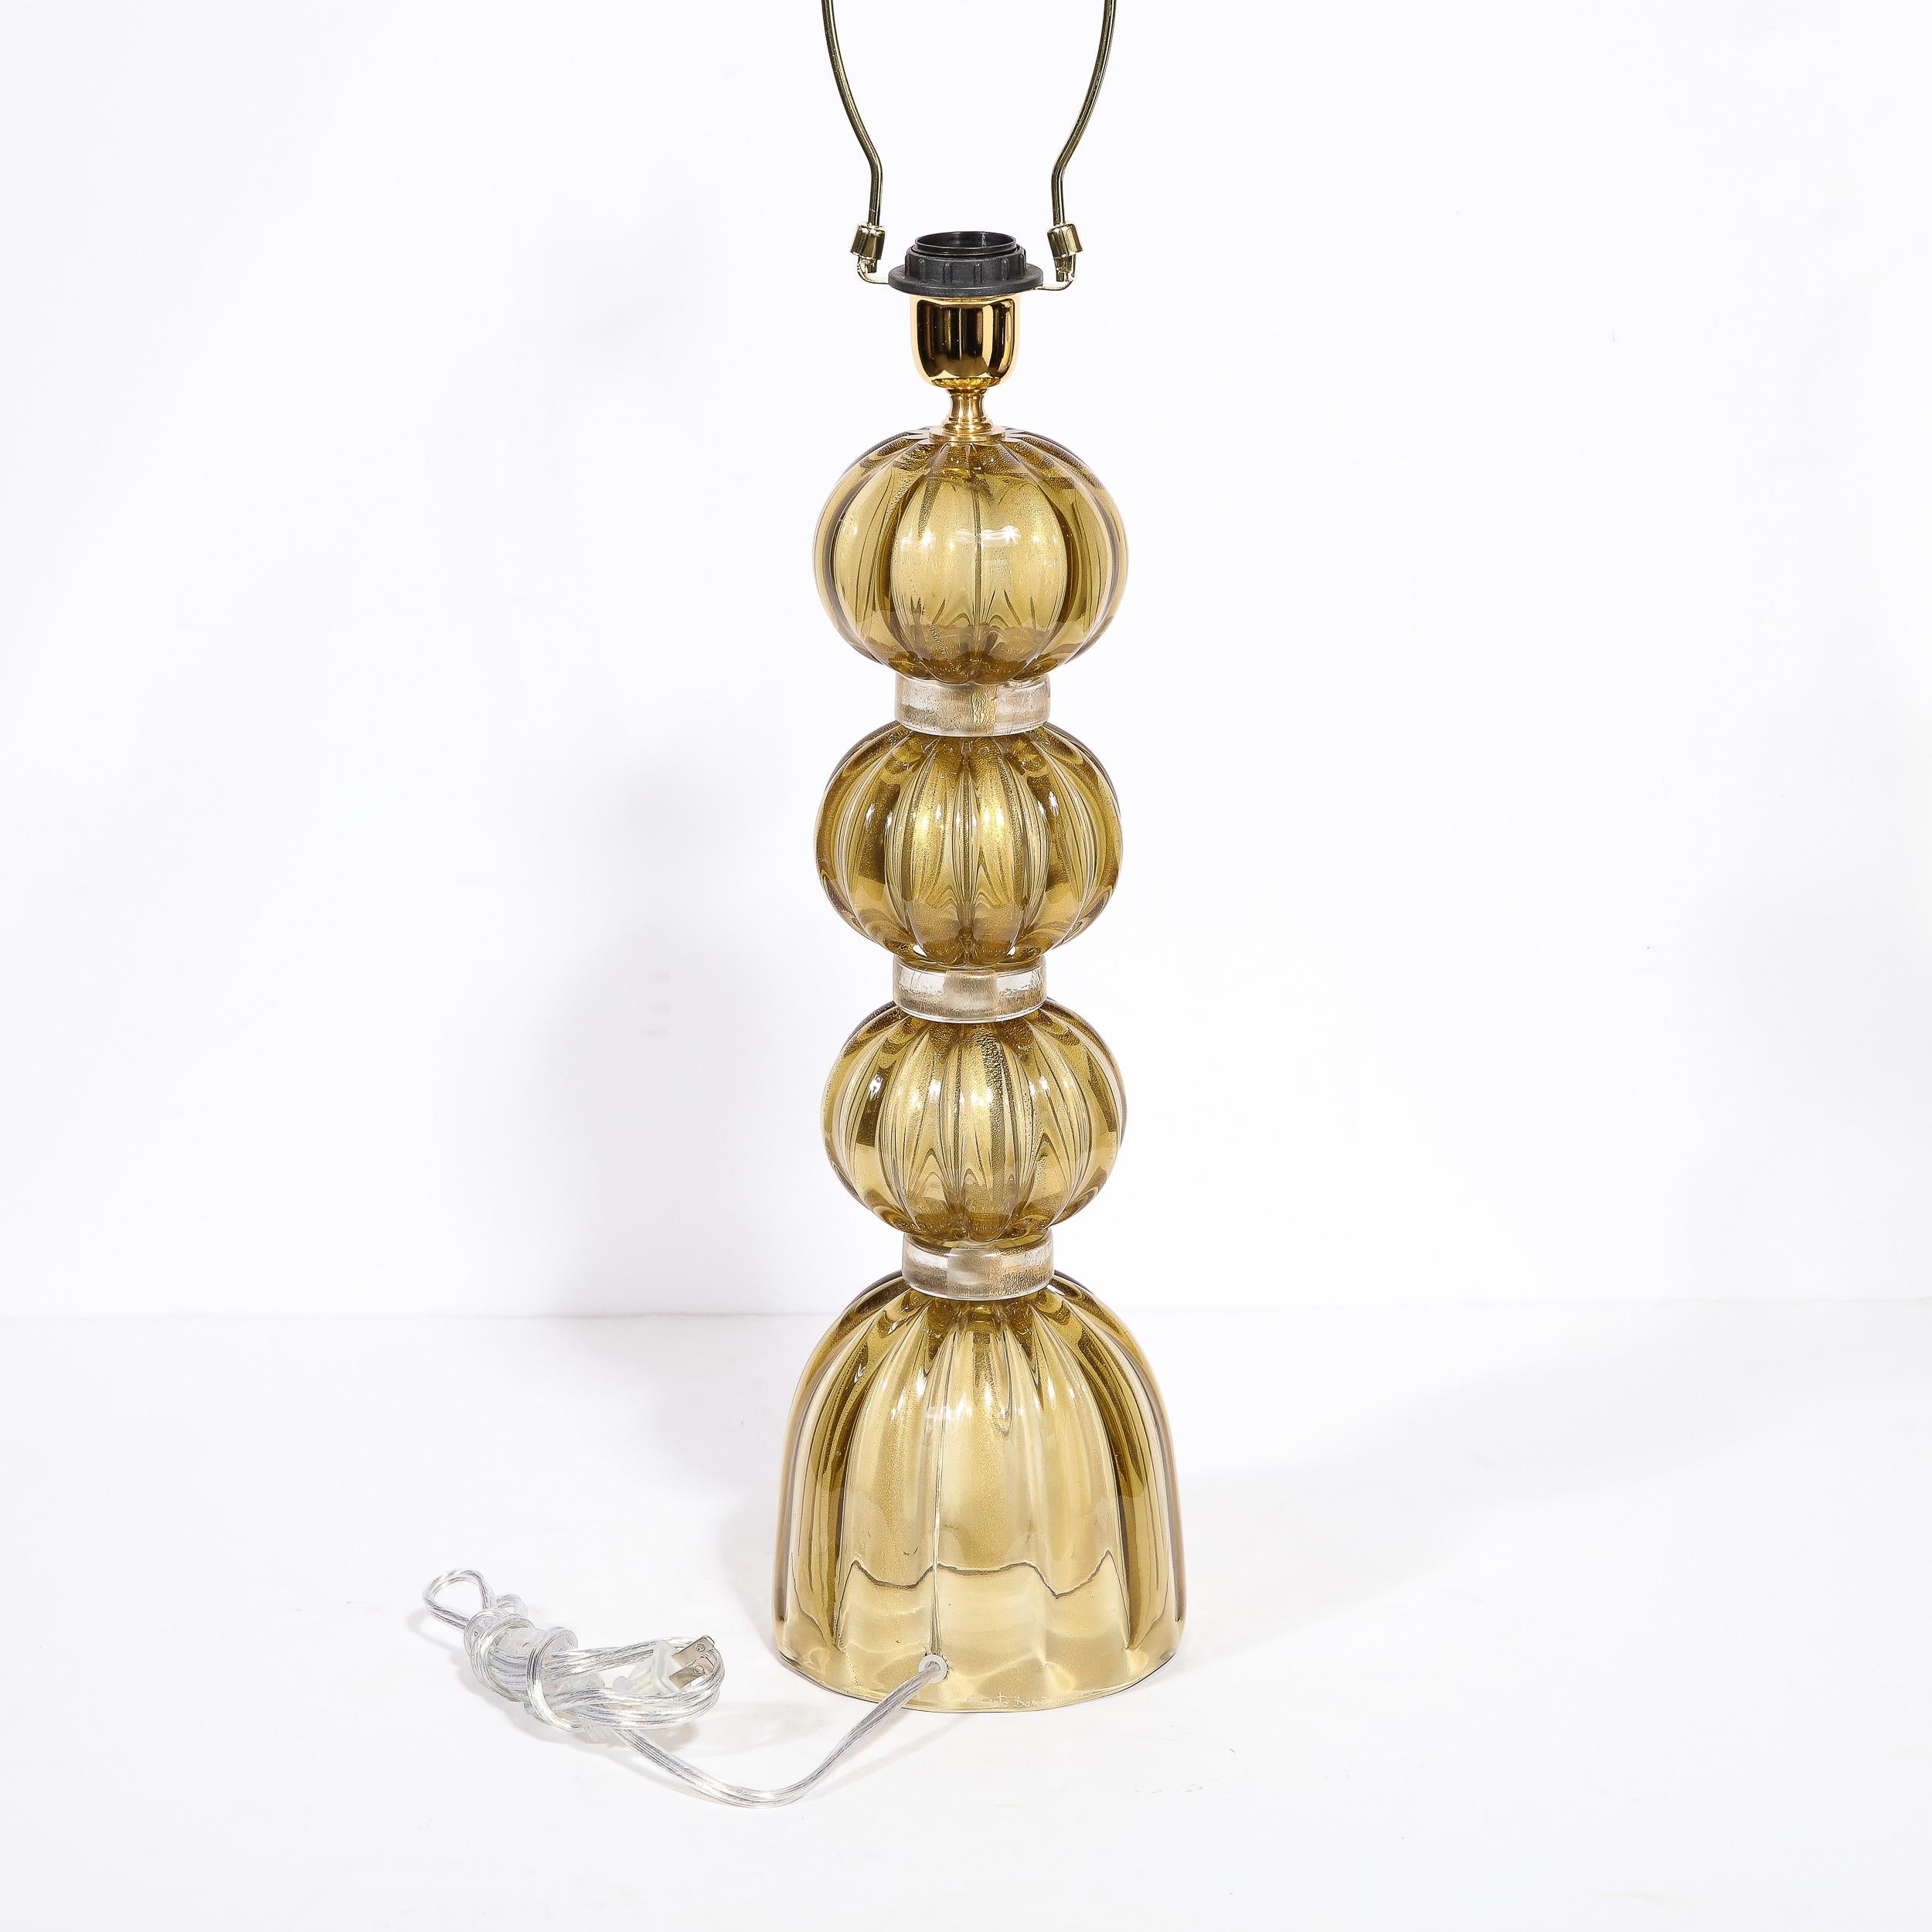 Modernist Hand-Blown Murano Glass Table Lamps in Smoked Gold W/ 24 Karat Flecks For Sale 5